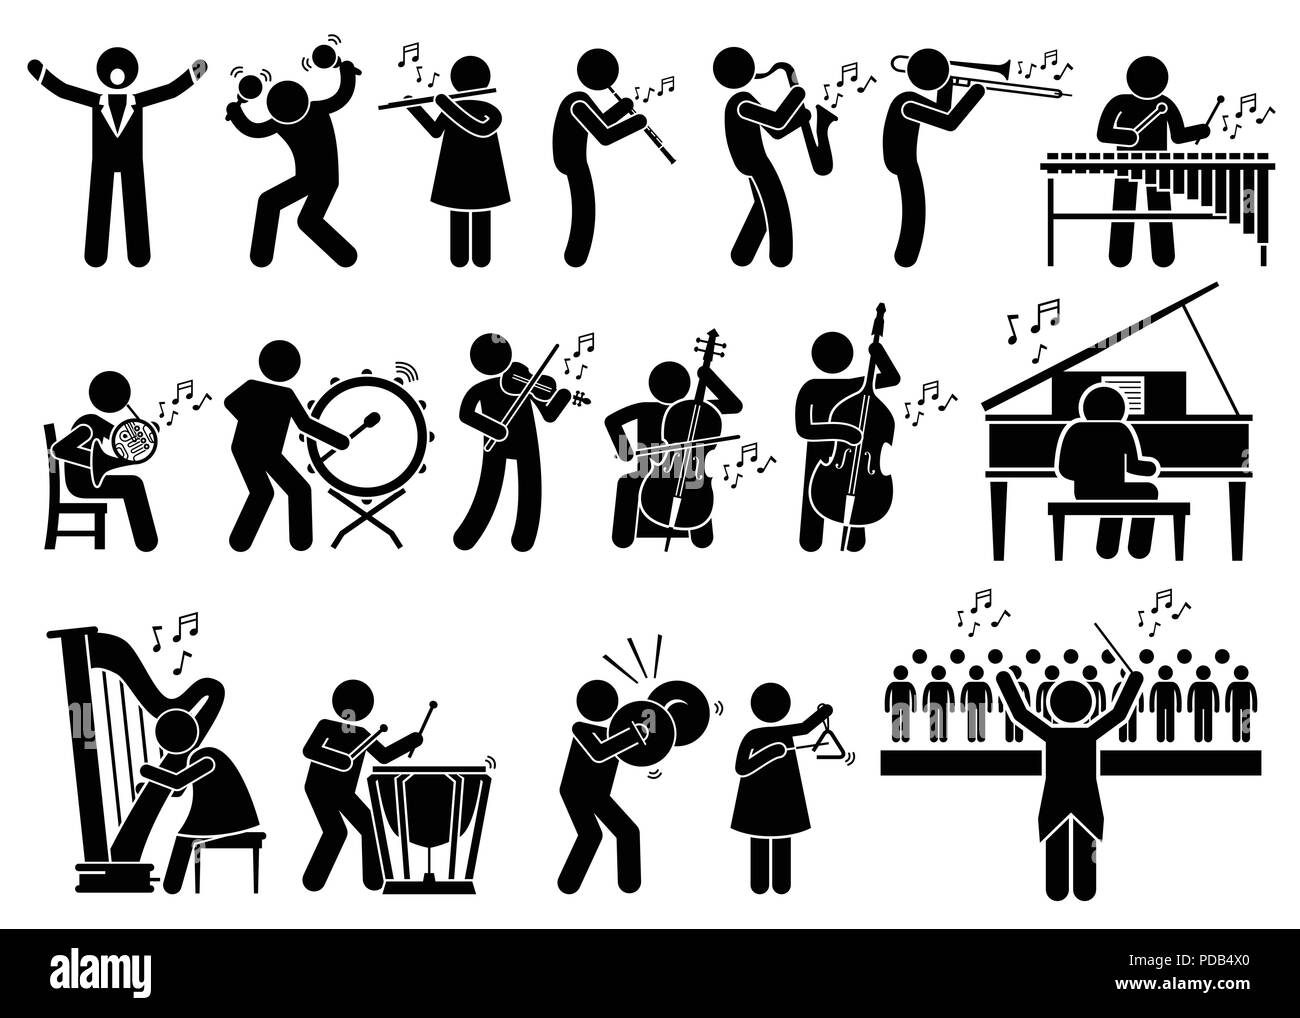 Orchestra Symphony Musicians with Musical Instruments Stick Figure Pictogram Icons Stock Vector